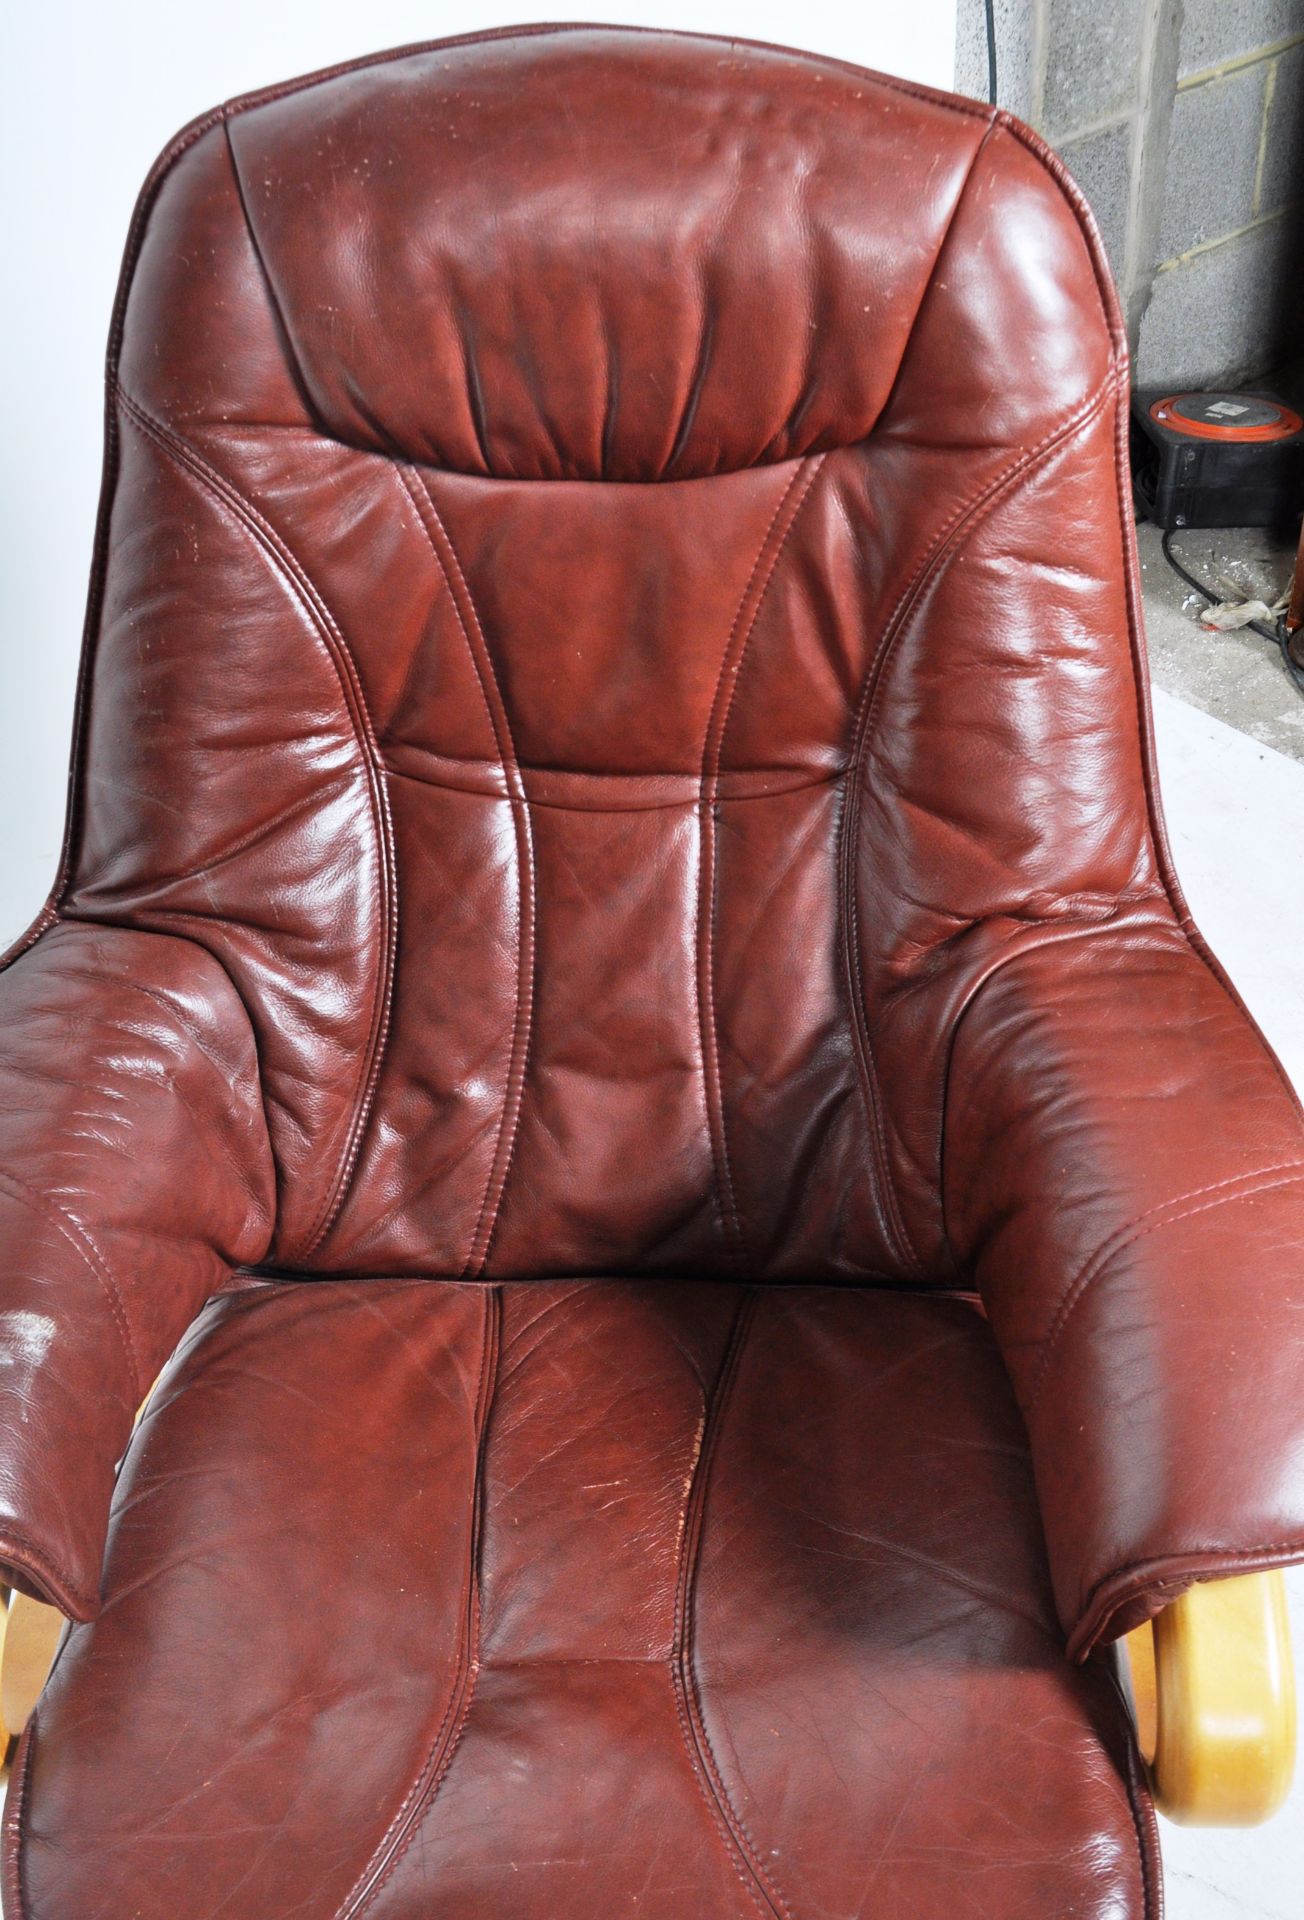 CONTEMPORARY DARK BROWN LEATHER UPHOLSTERED RECLINING CHAIR - Image 3 of 8